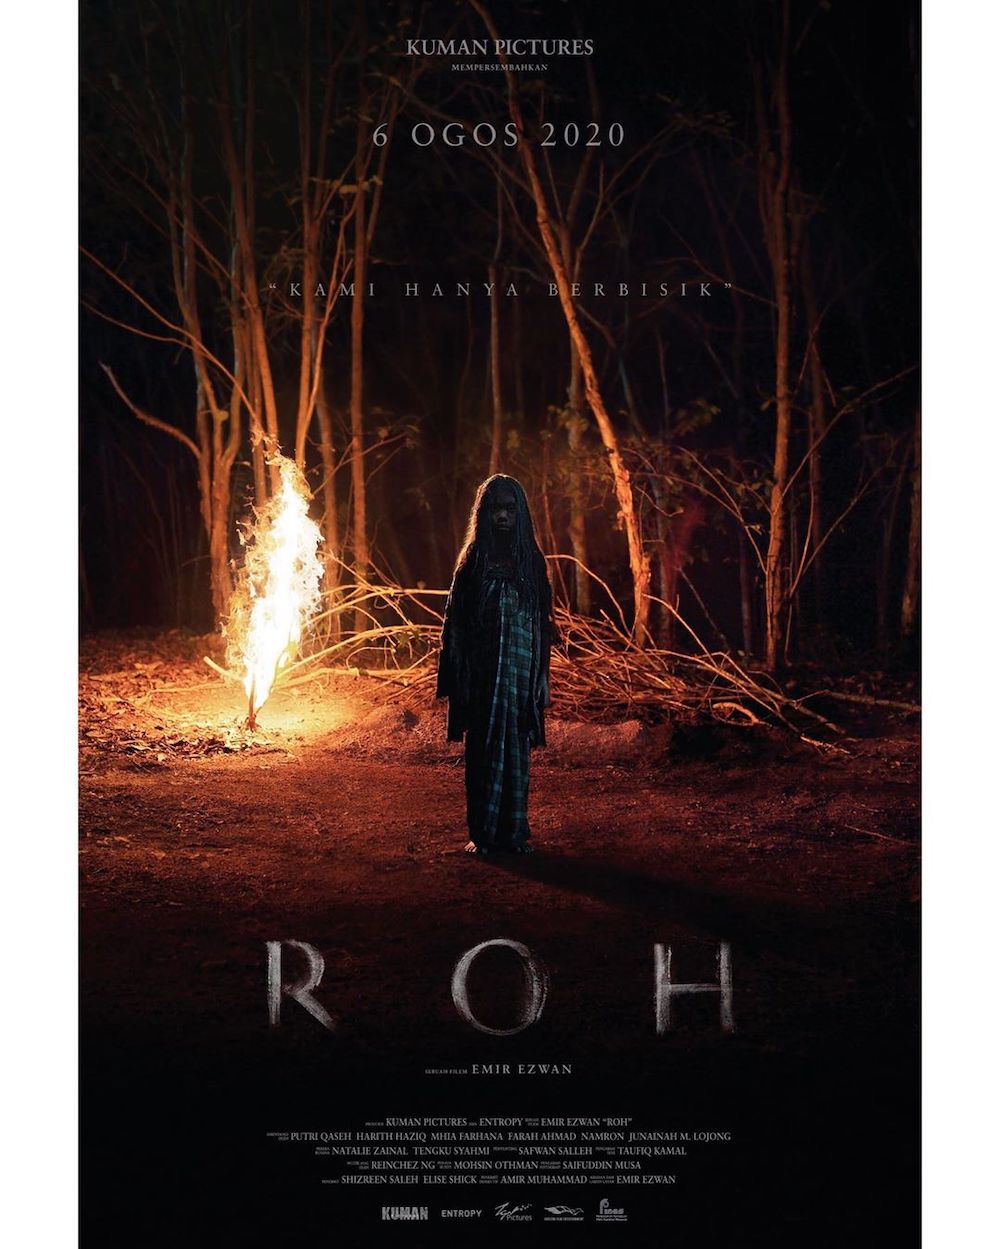 Horror film, Roh will hit cinema screens nationwide this August 6. u00e2u20acu201d photo courtesy of Instagram/ Kuman Pictures